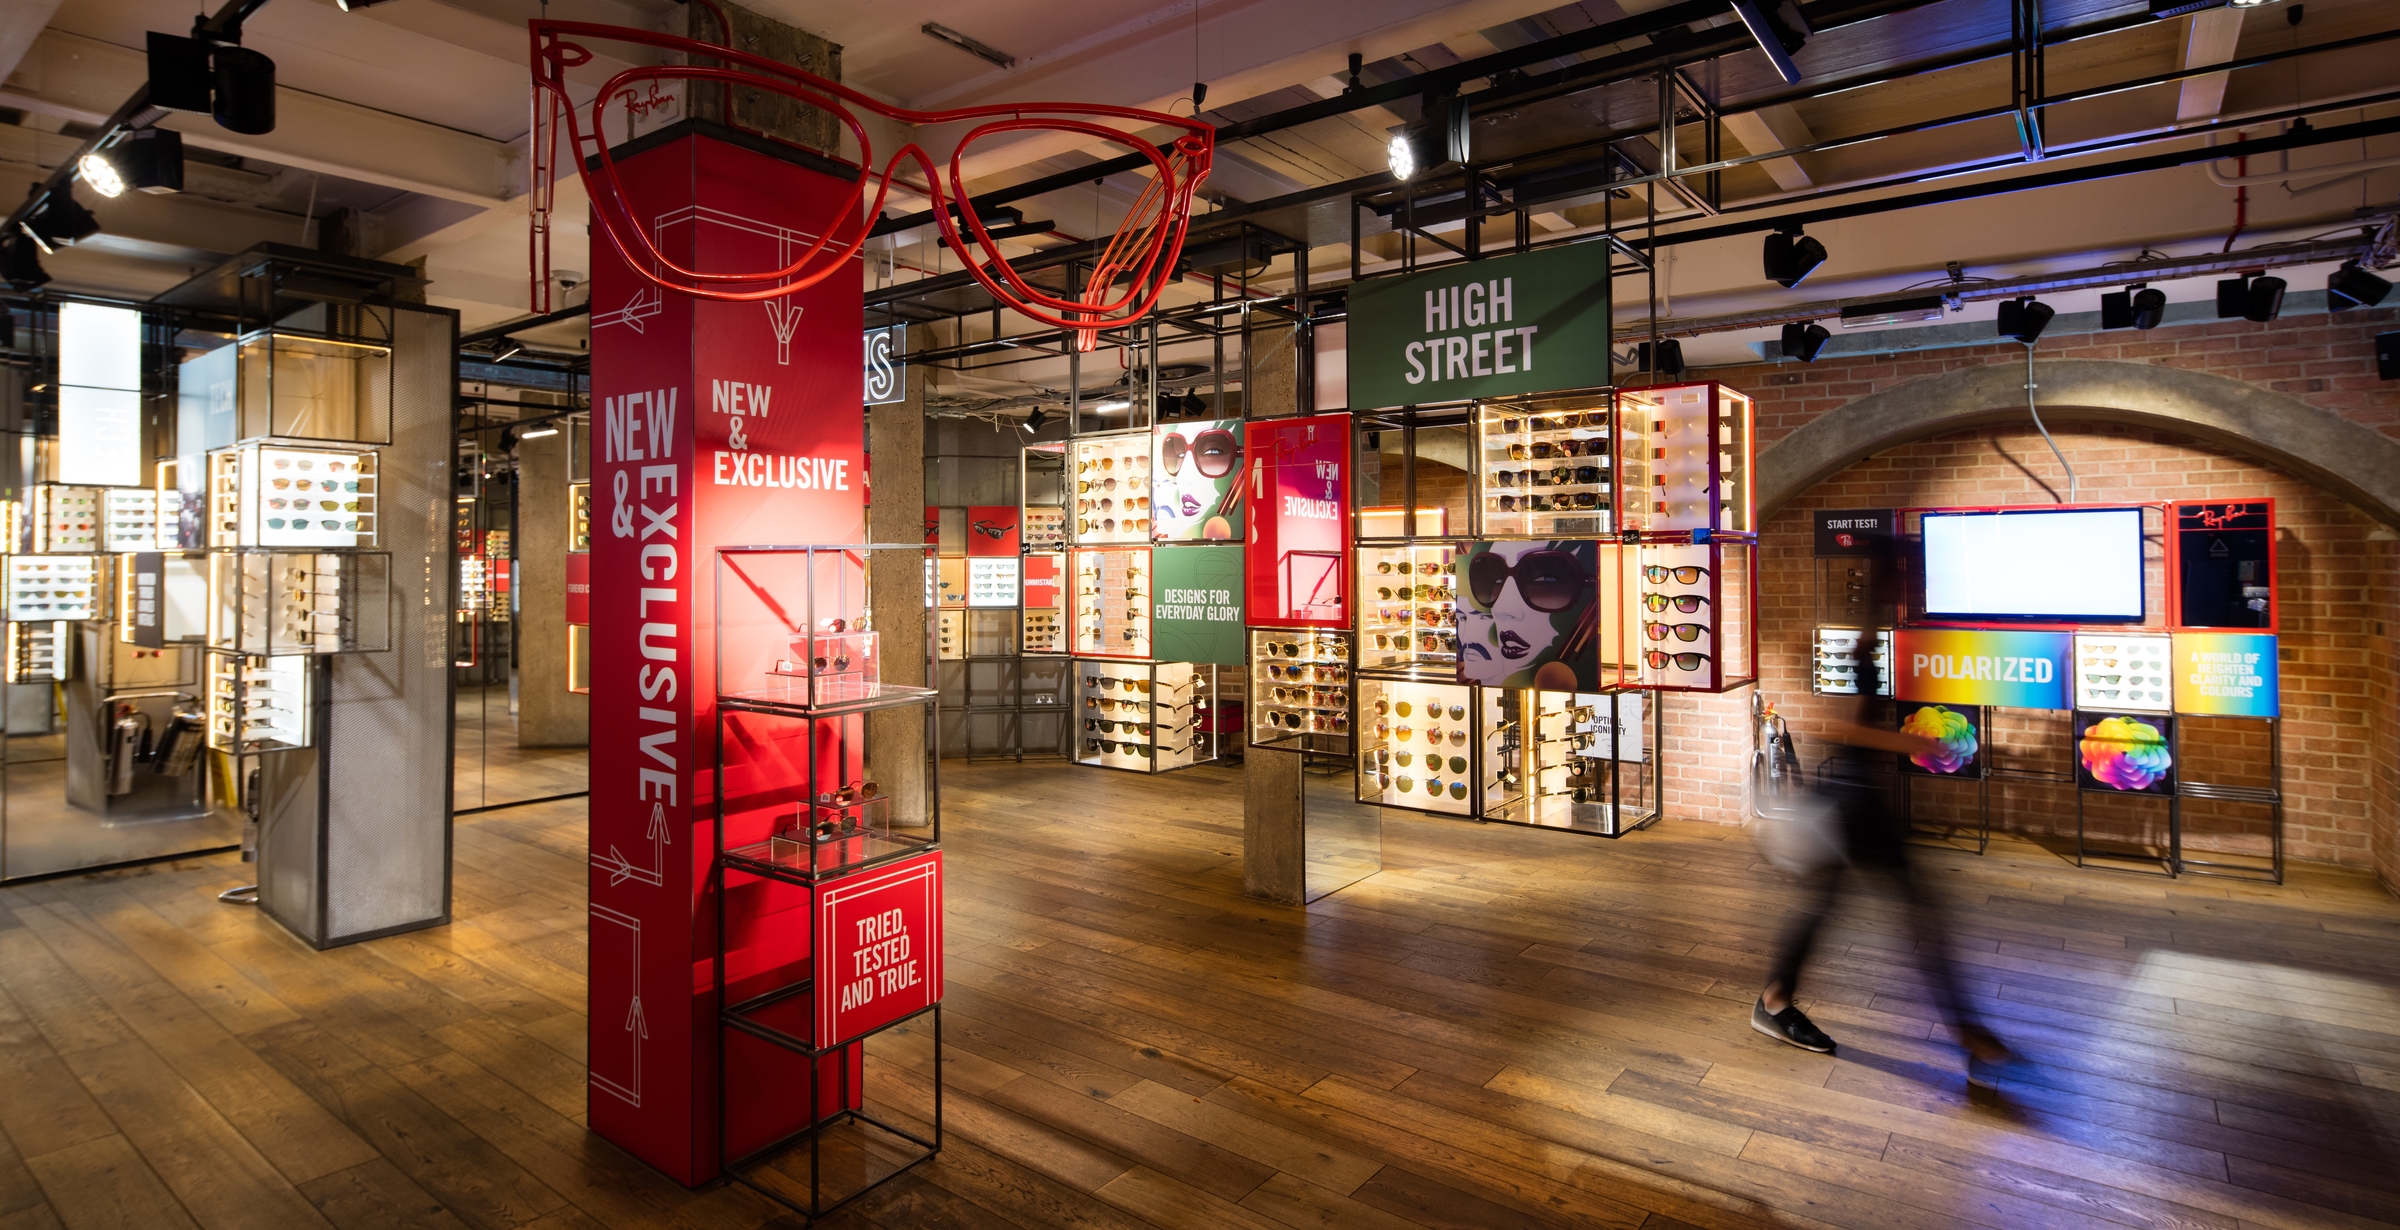 ray ban store oxford street